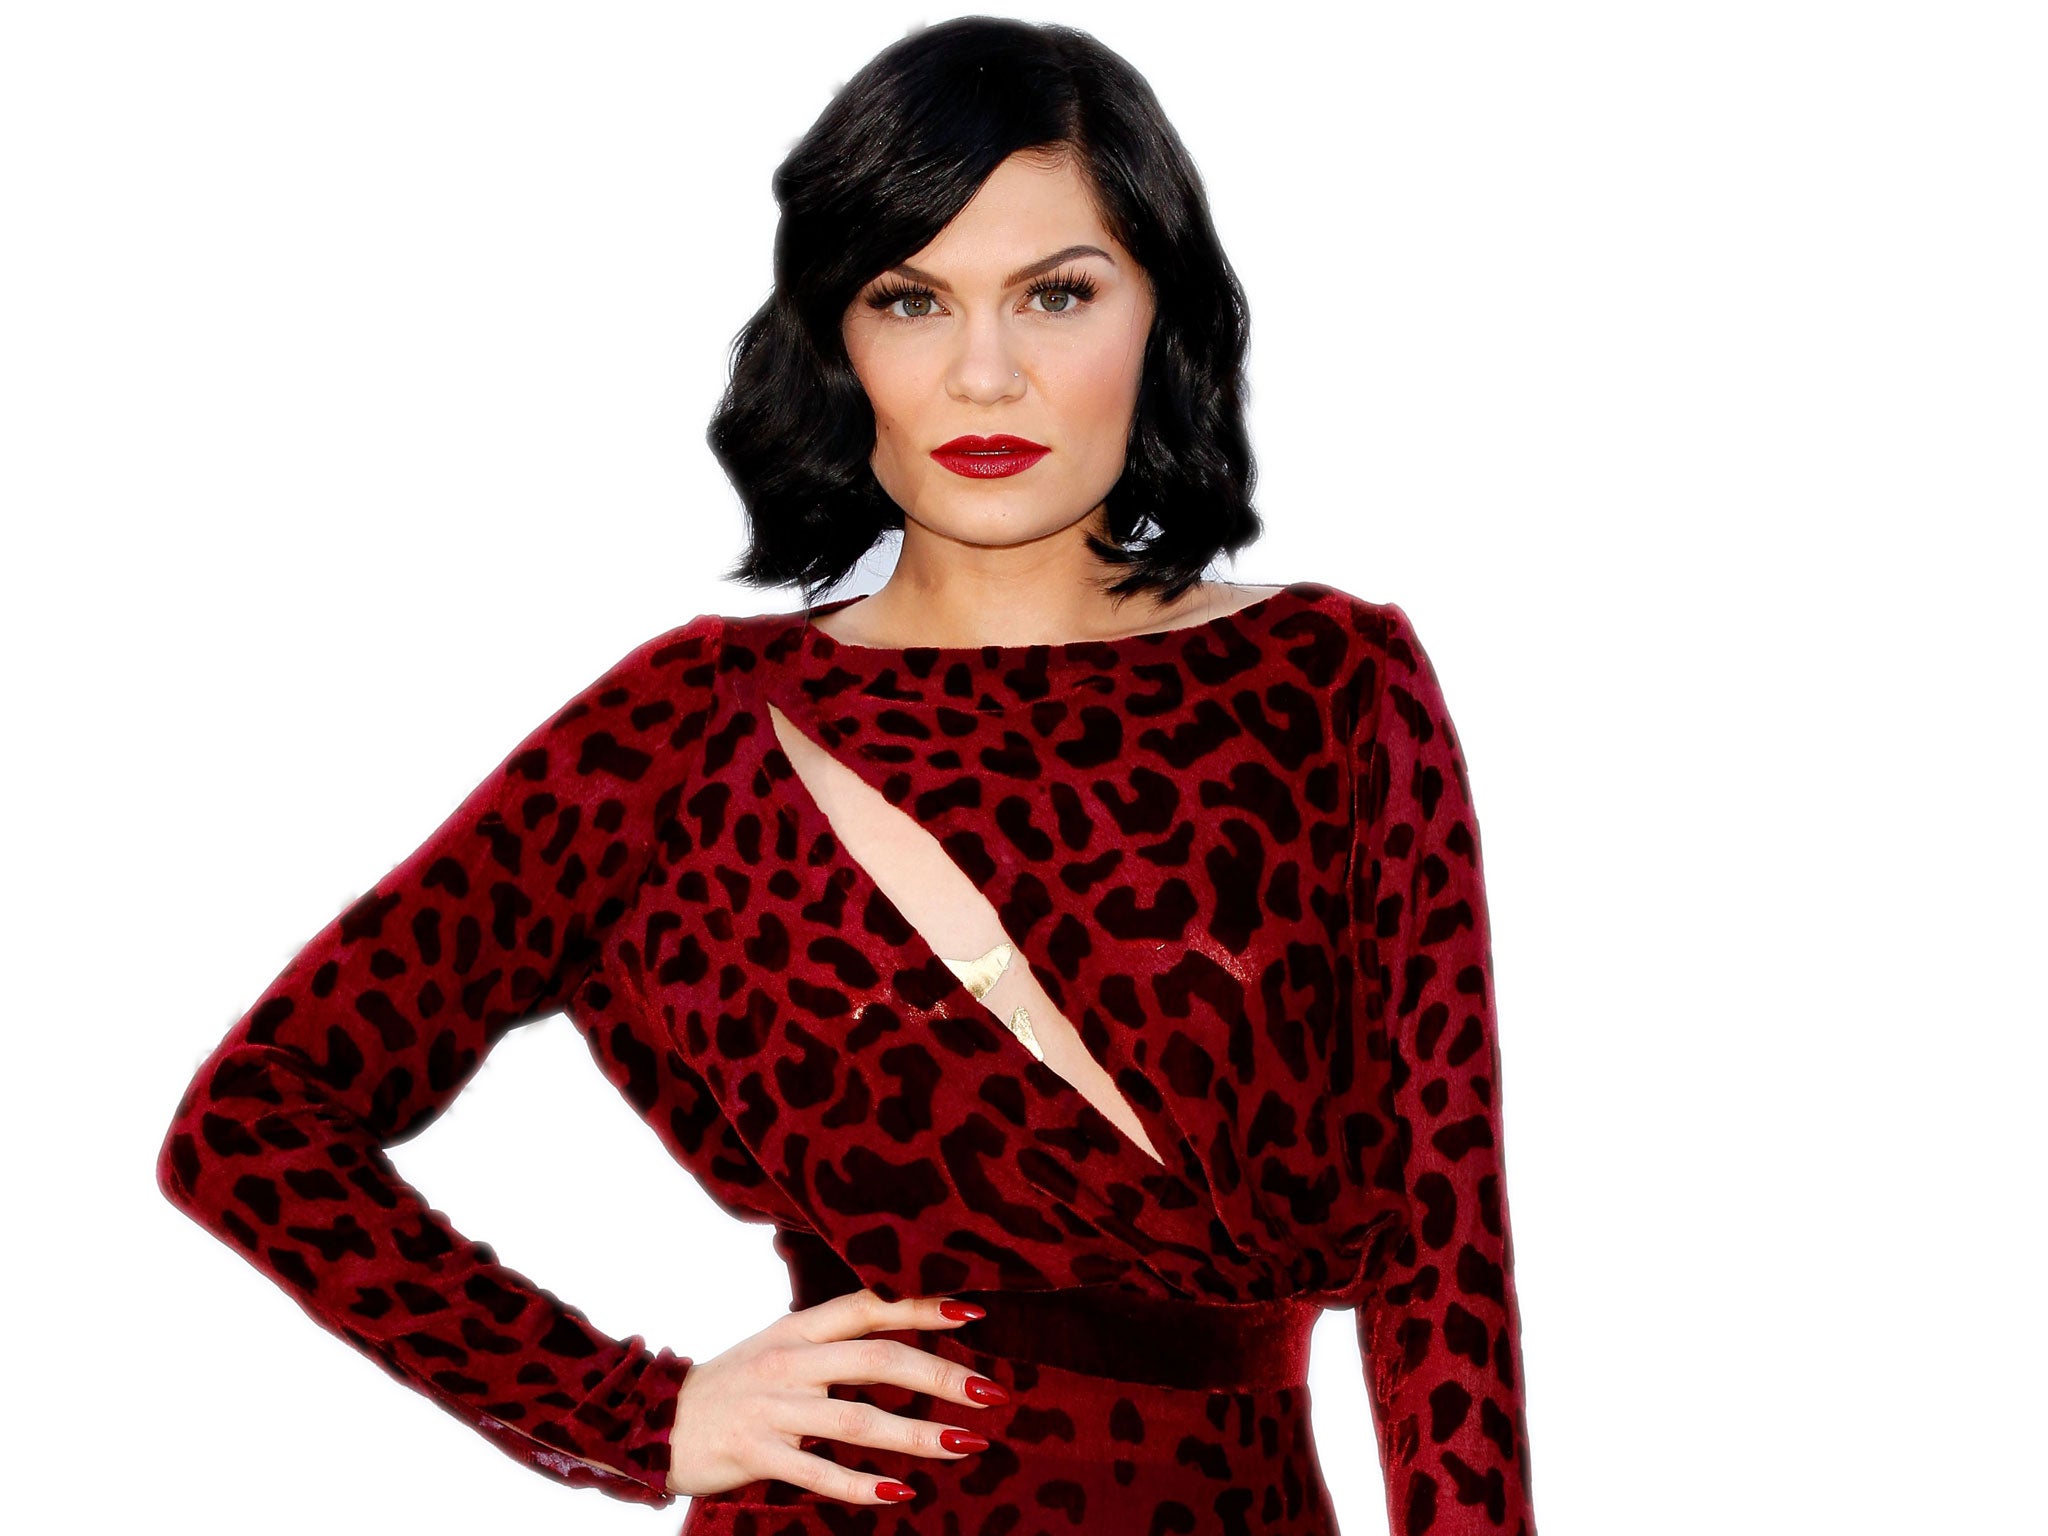 Jessie J: The 24-year-old star of The Voice topped the poll in 2011